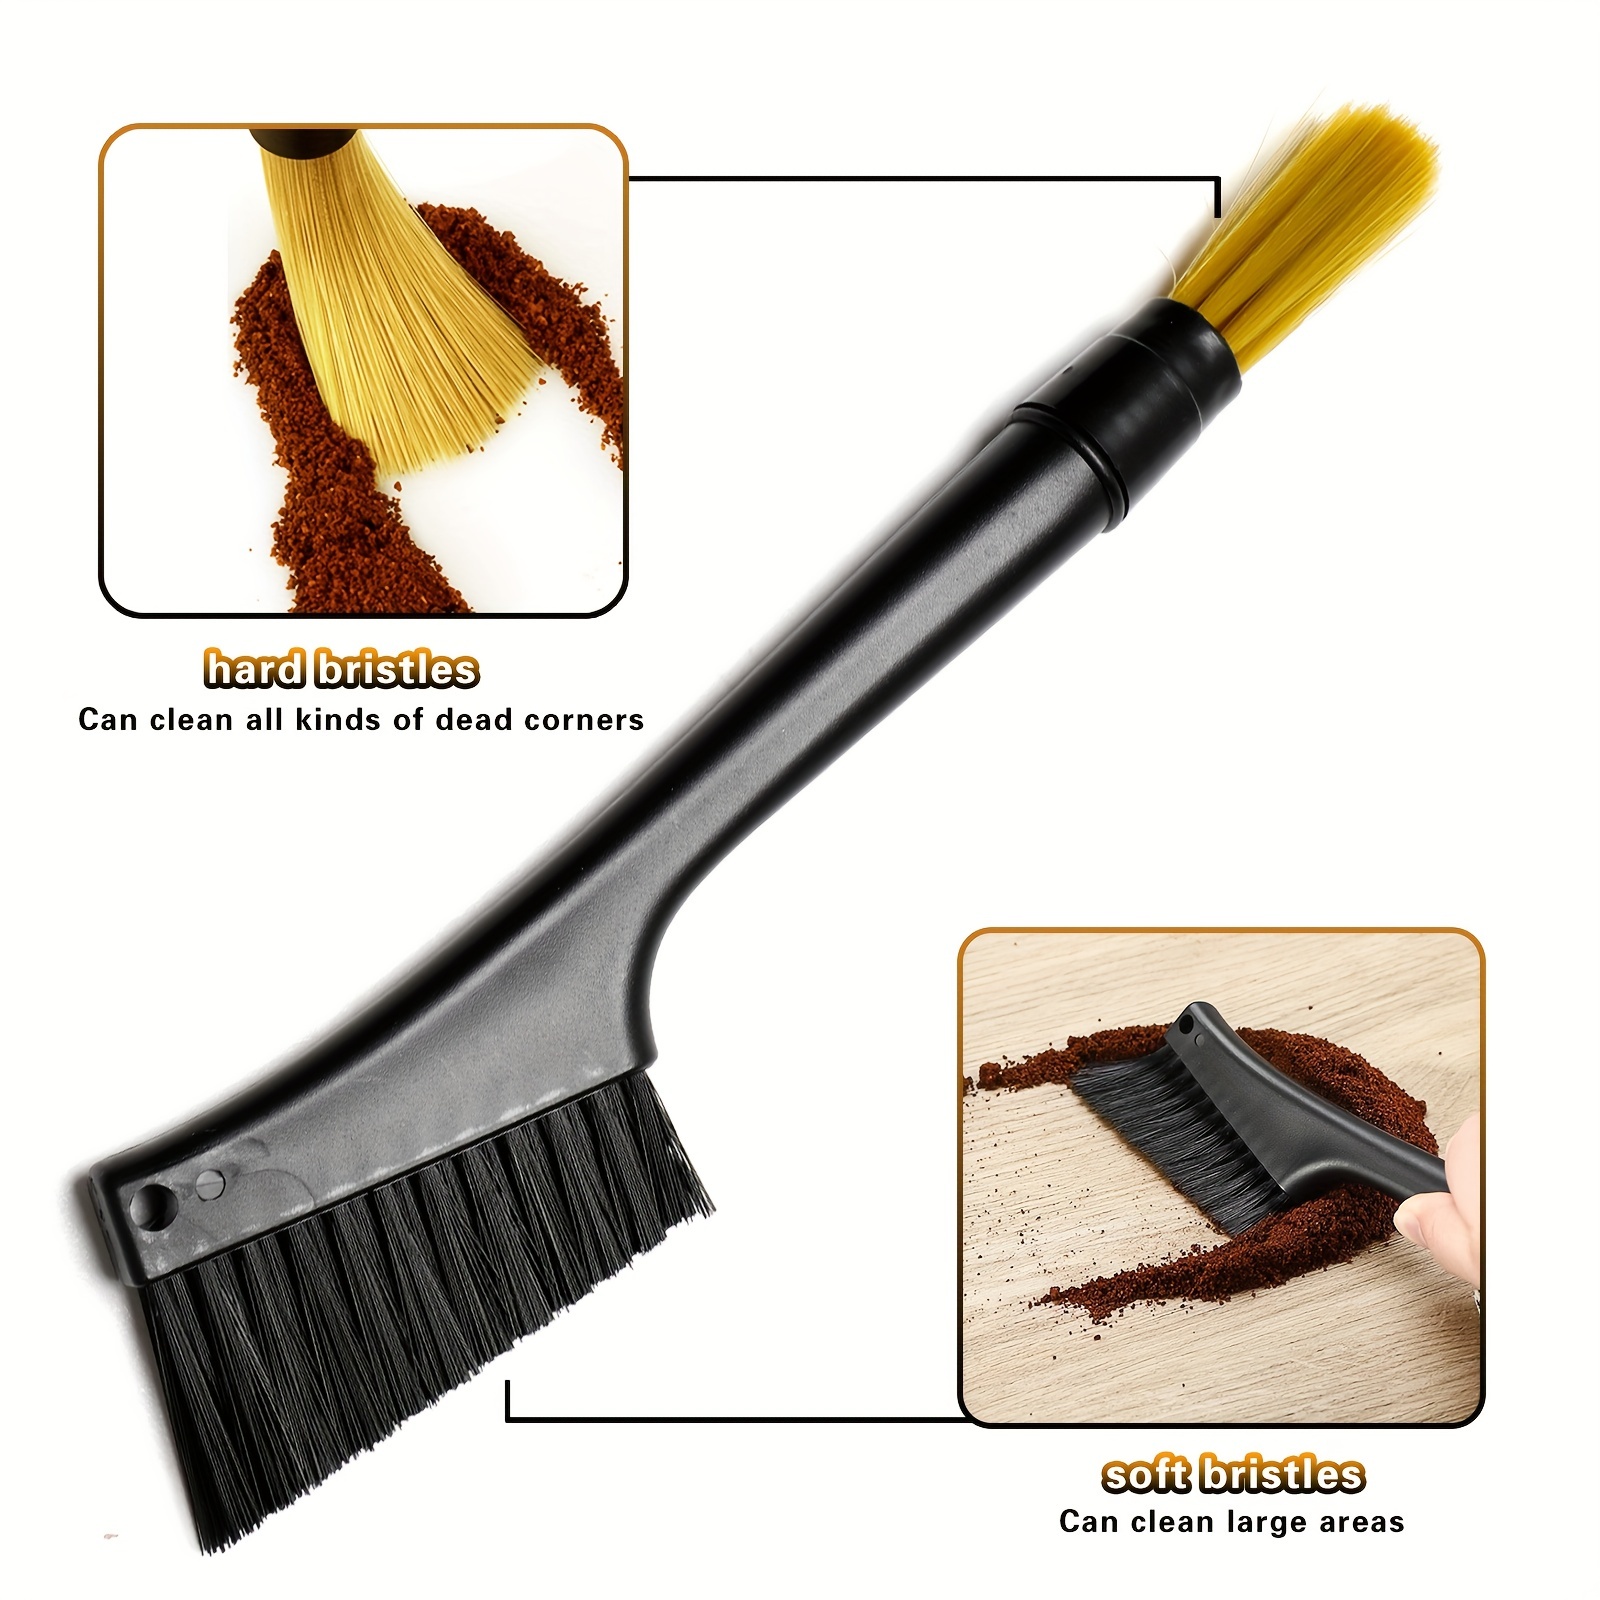 Double-Ended Nylon Cleaning Brushes